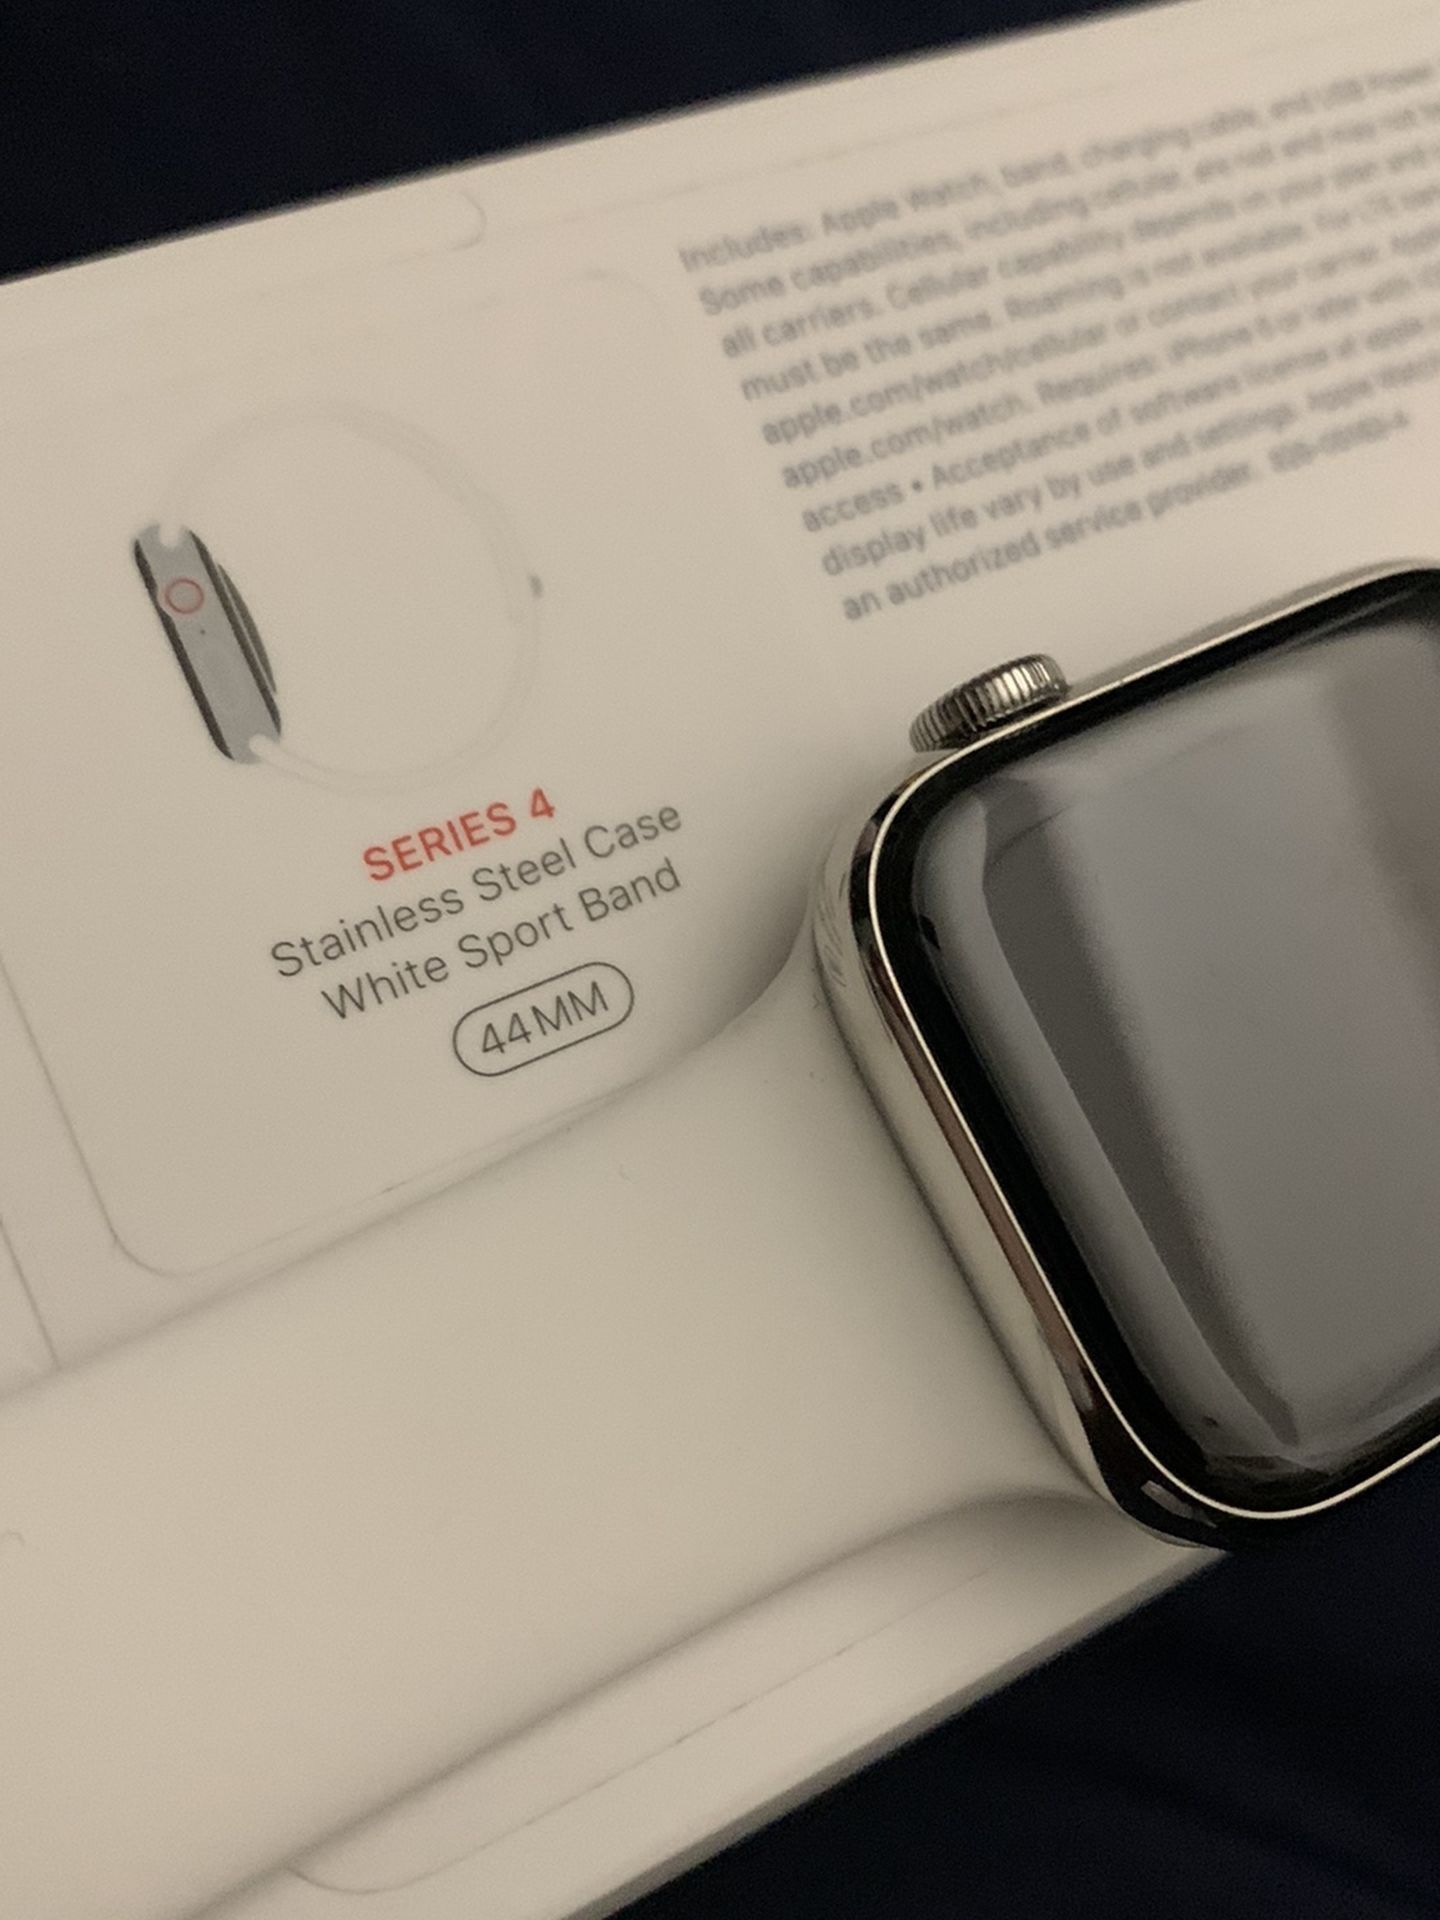 WOW apple Watch Series 4 LTE 44mm In Box With Accessories